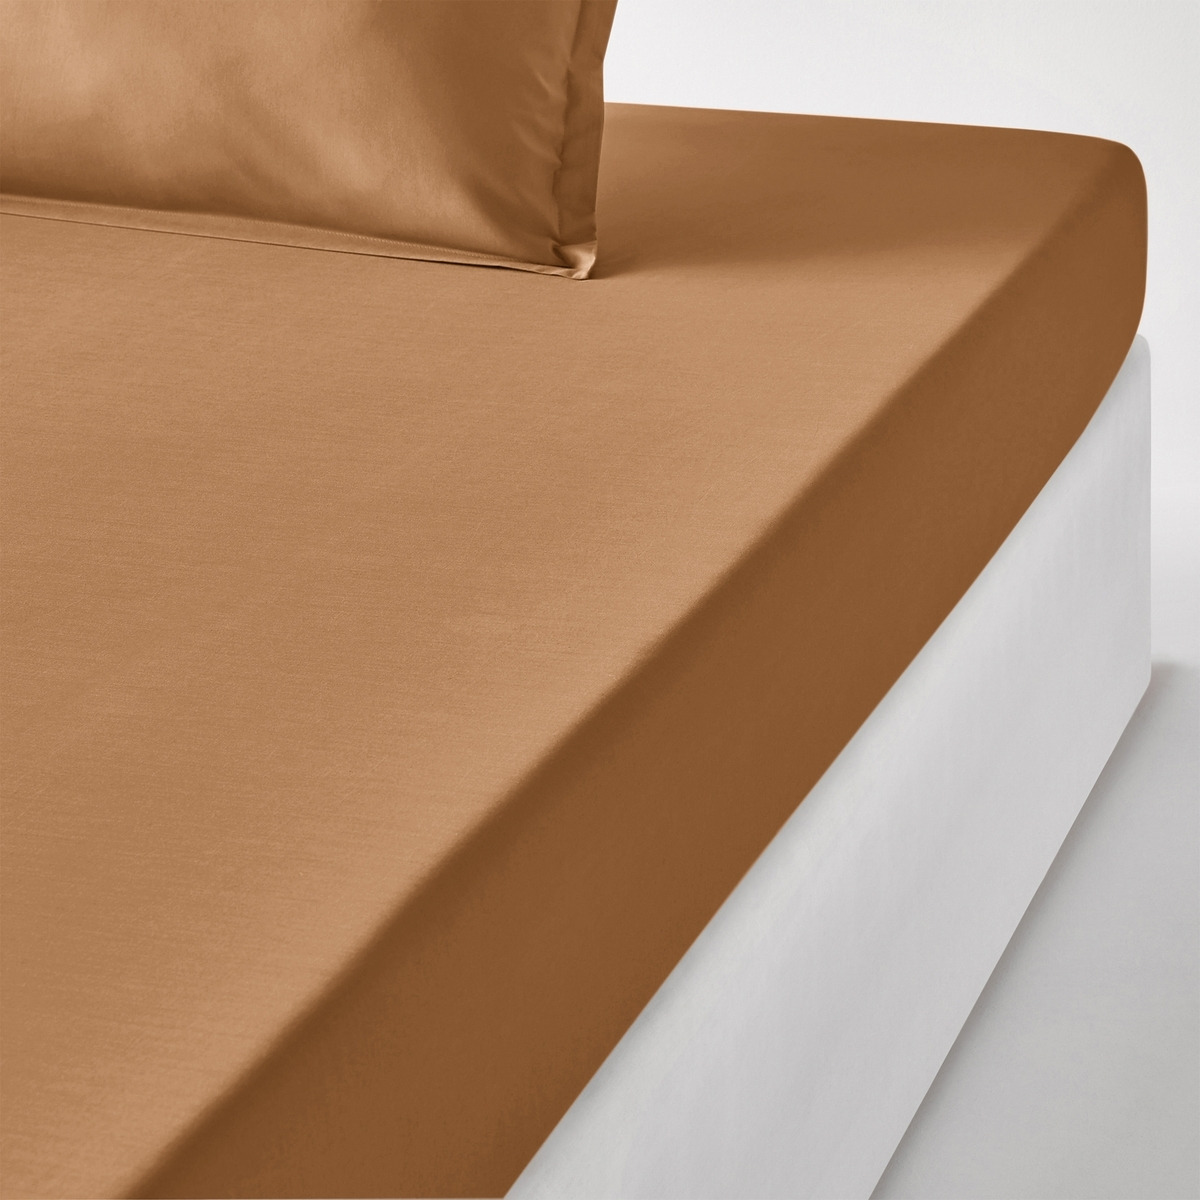 Best Quality Plain 100% Cotton Percale 200 Thread Count Fitted Sheet - image 1